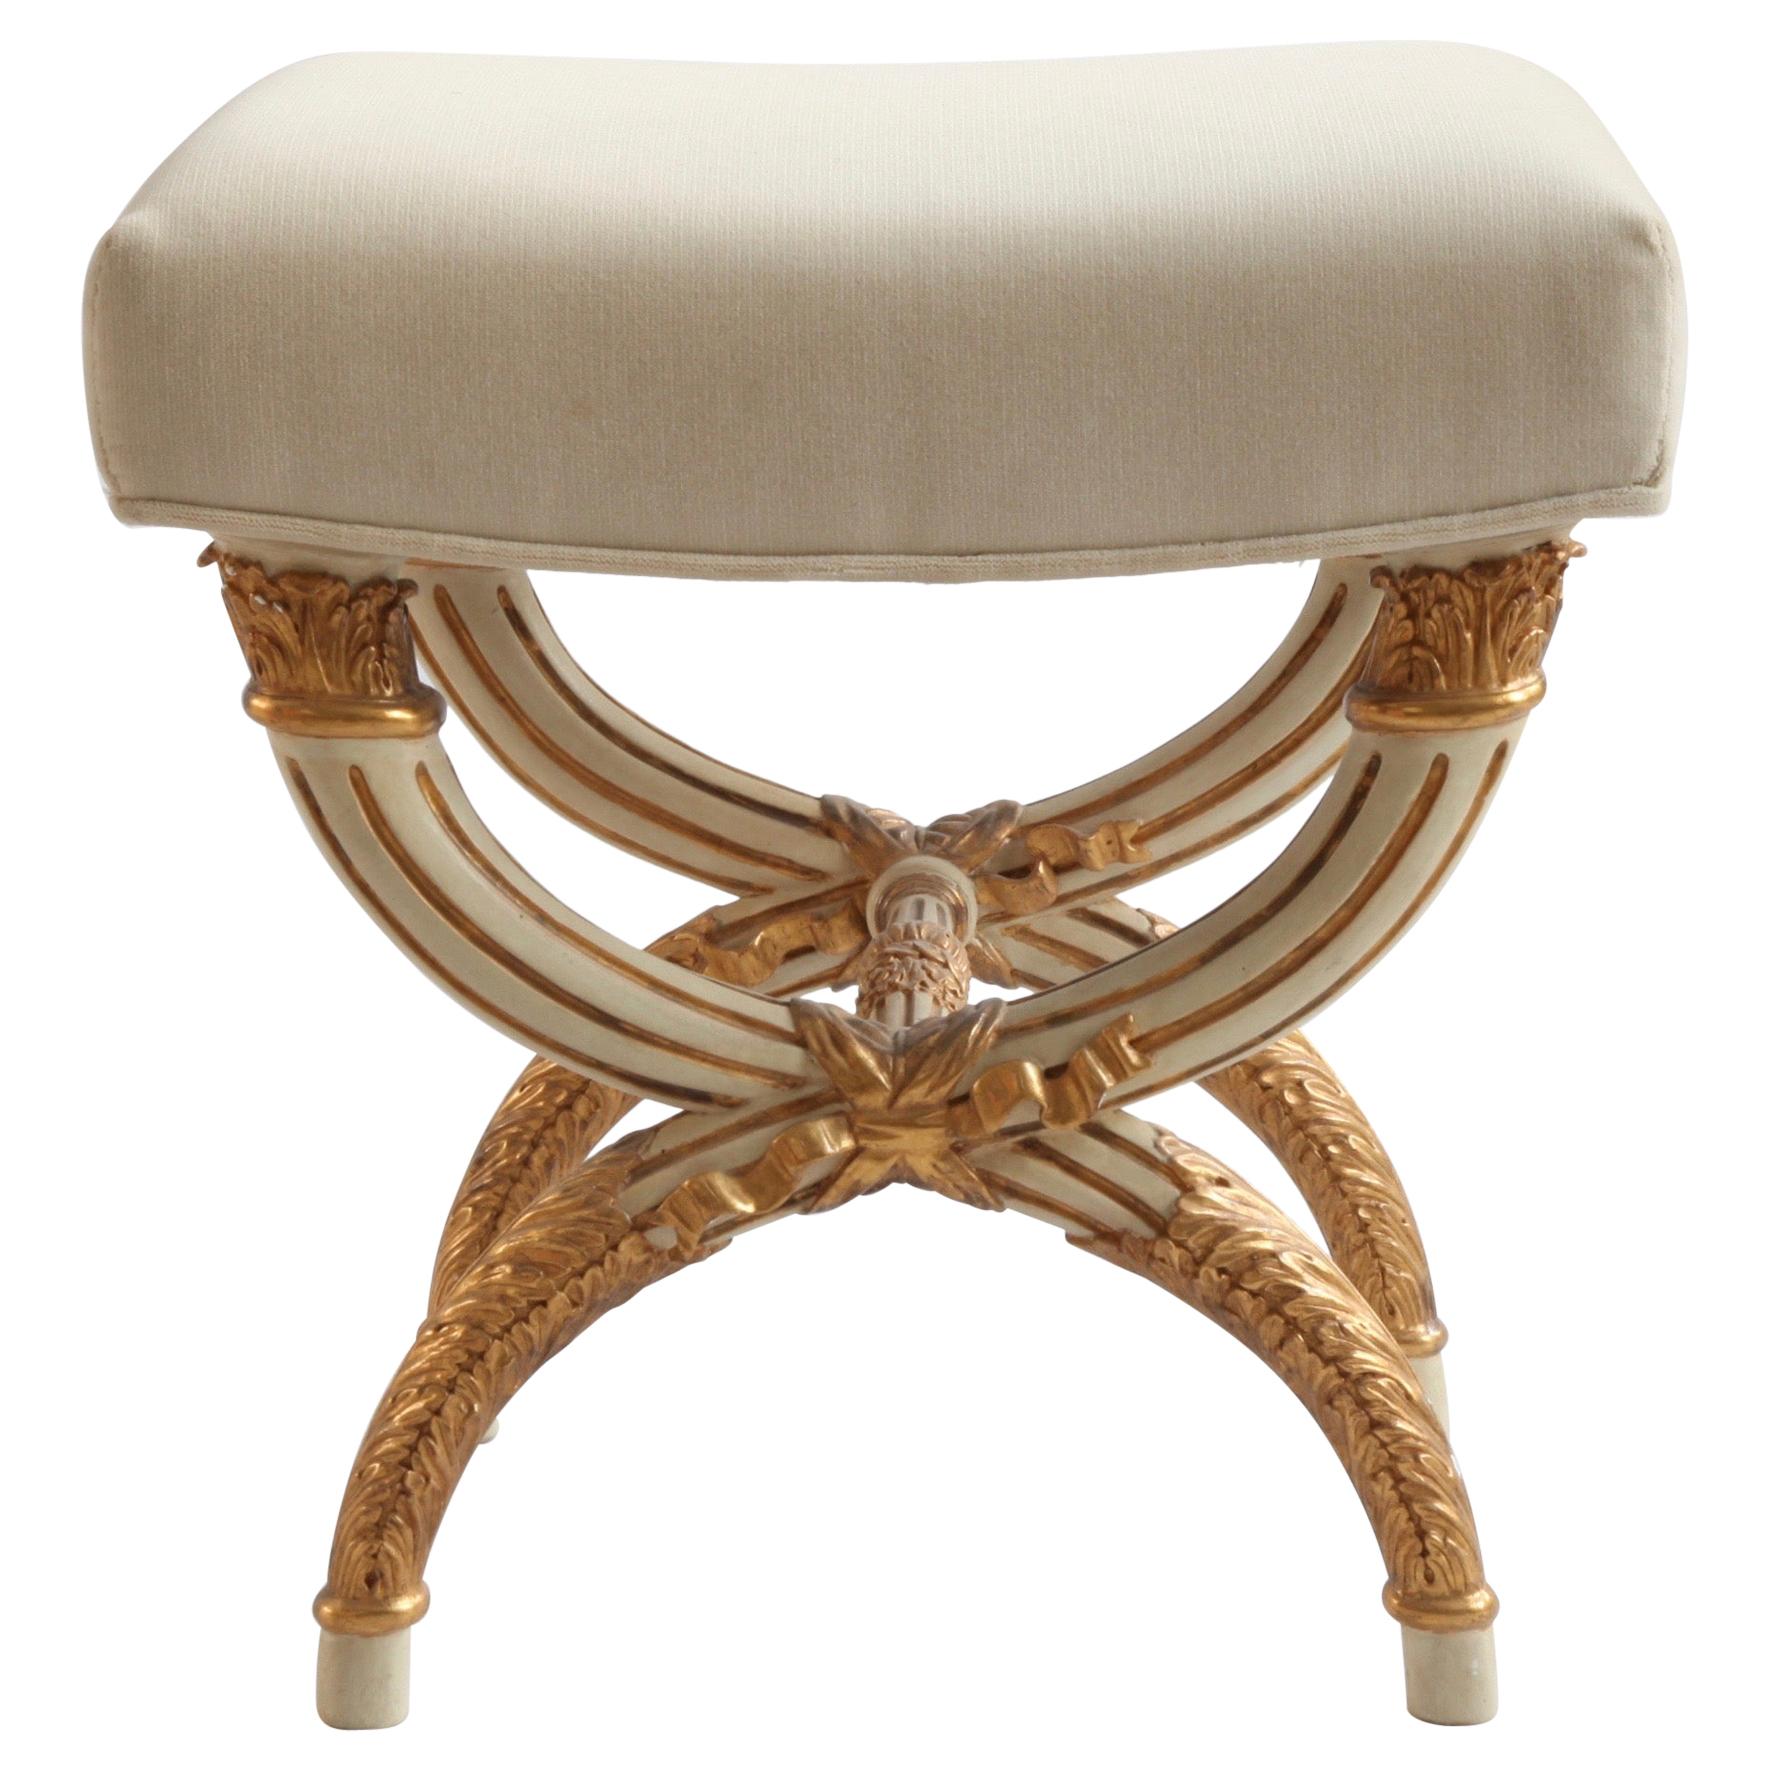 Louis XVI Style Stool in X-Shaped, Painted in Warm Grey with Gold Highlights